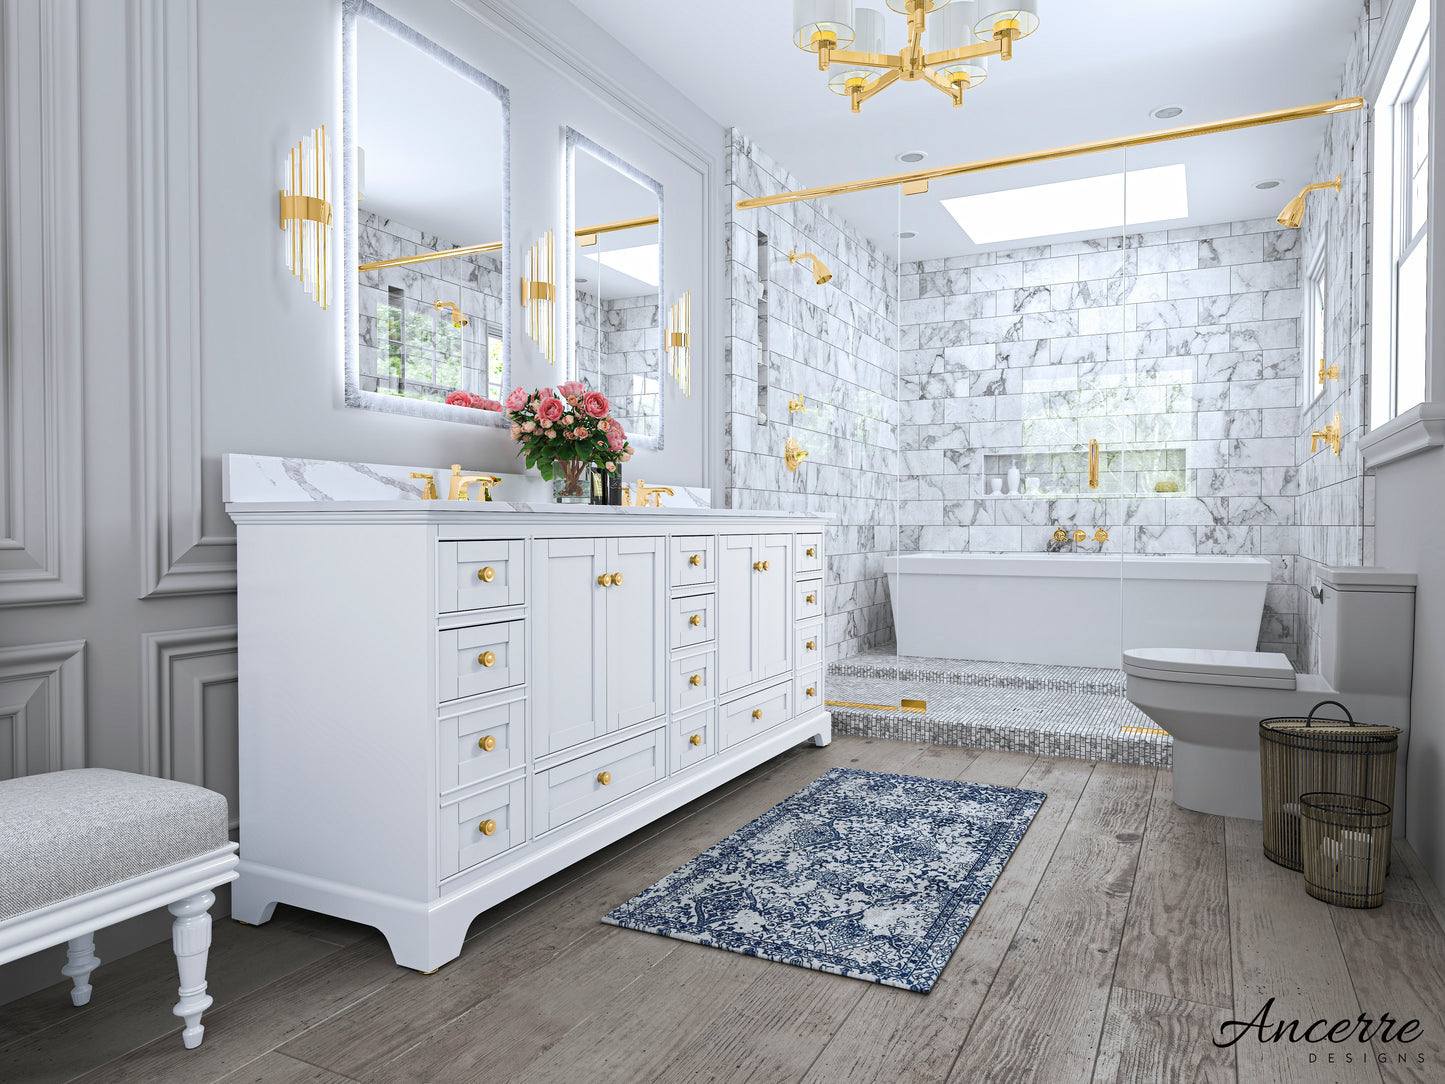 Ancerre Designs Audrey 84 in. Bath Vanity Set in White with Quartz Calacatta Laza Vanity top and White Undermount Basin with Gold Hardware - Luxe Bathroom Vanities